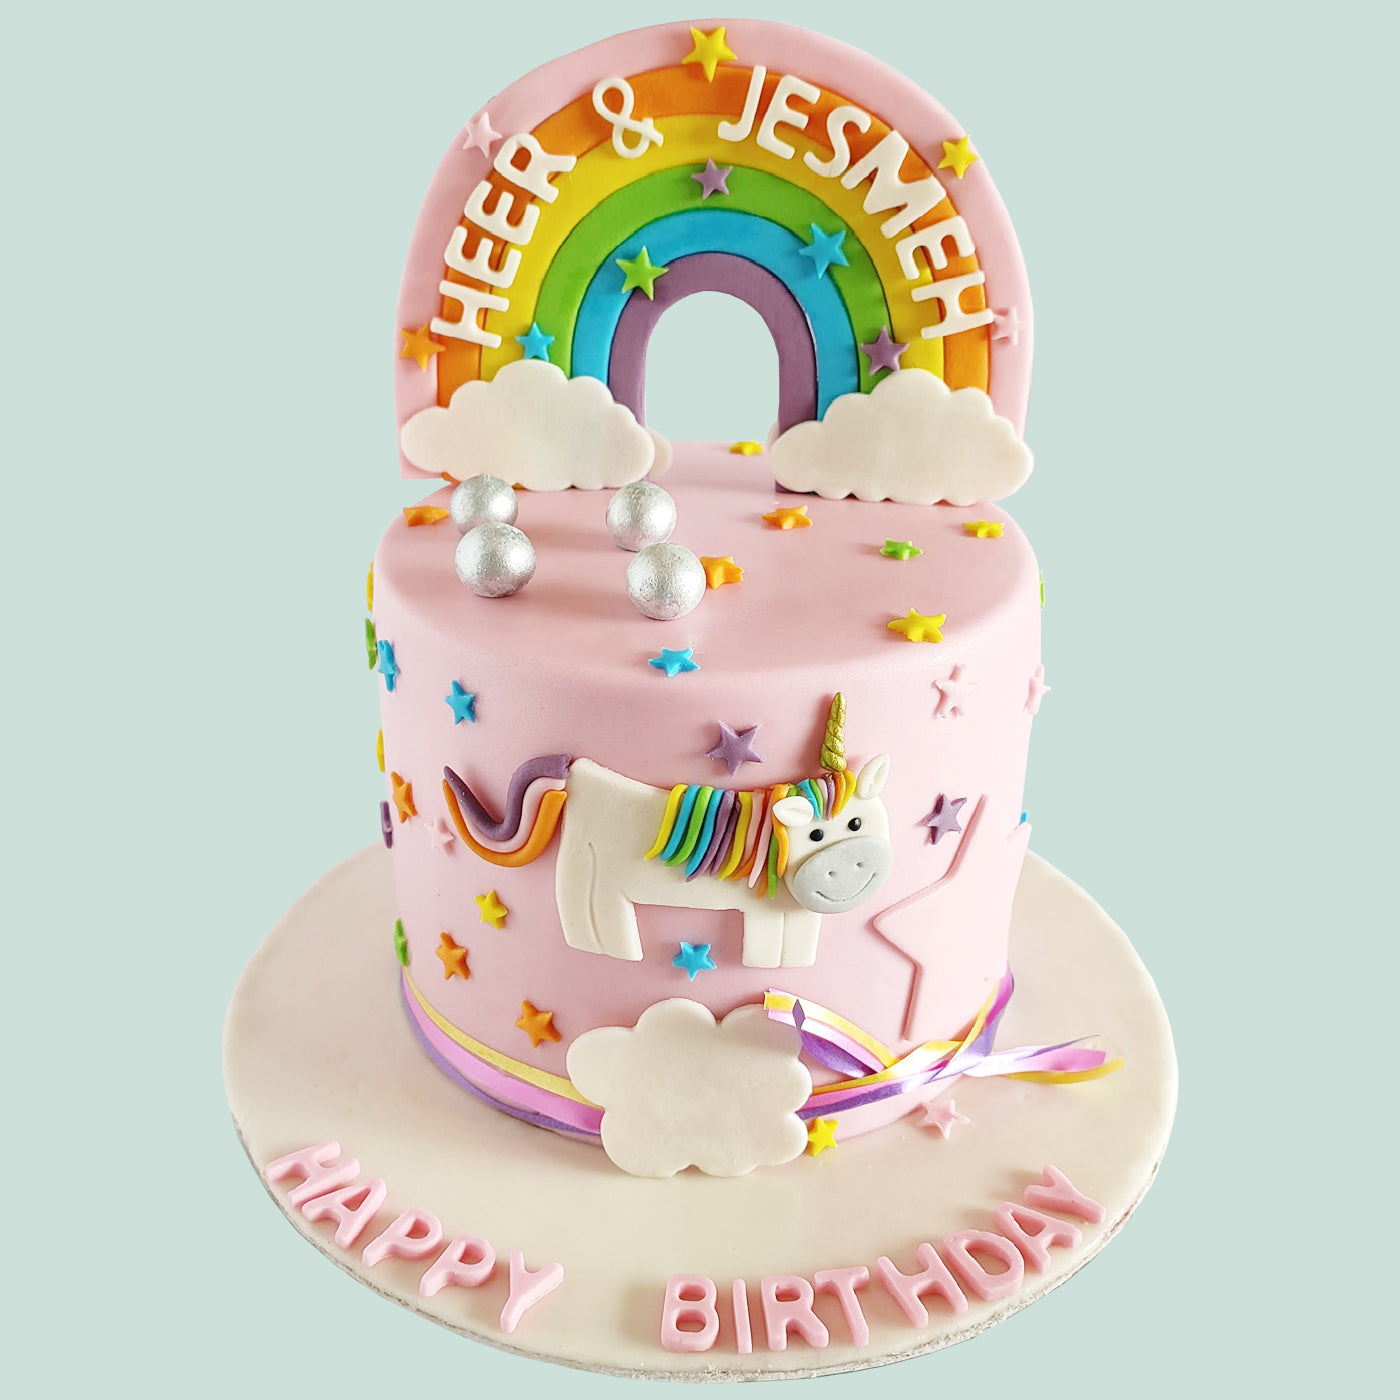 5 Simple and Fun Rainbow Cake Recipes - Cake by Courtney